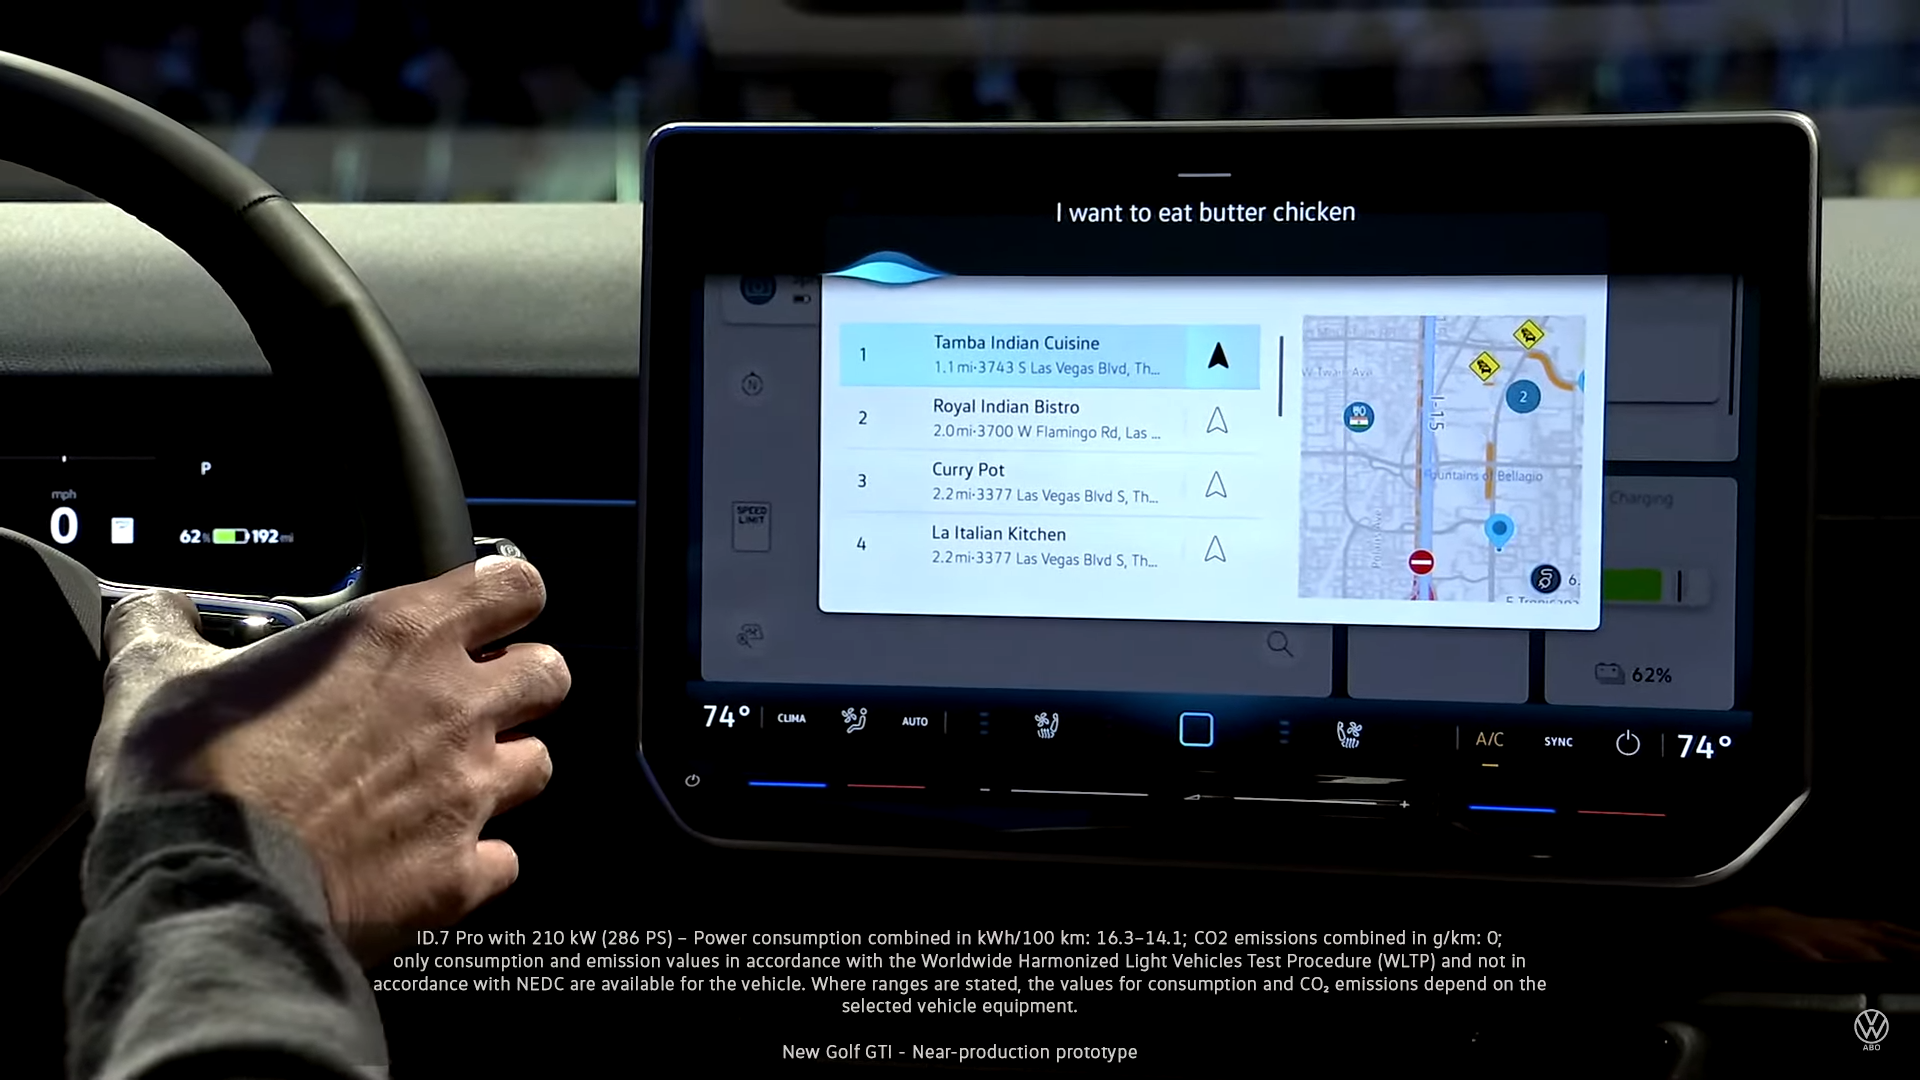 Volkswagen’s ChatGPT-powered voice assistant responds to the user’s commands. Source: YouTube